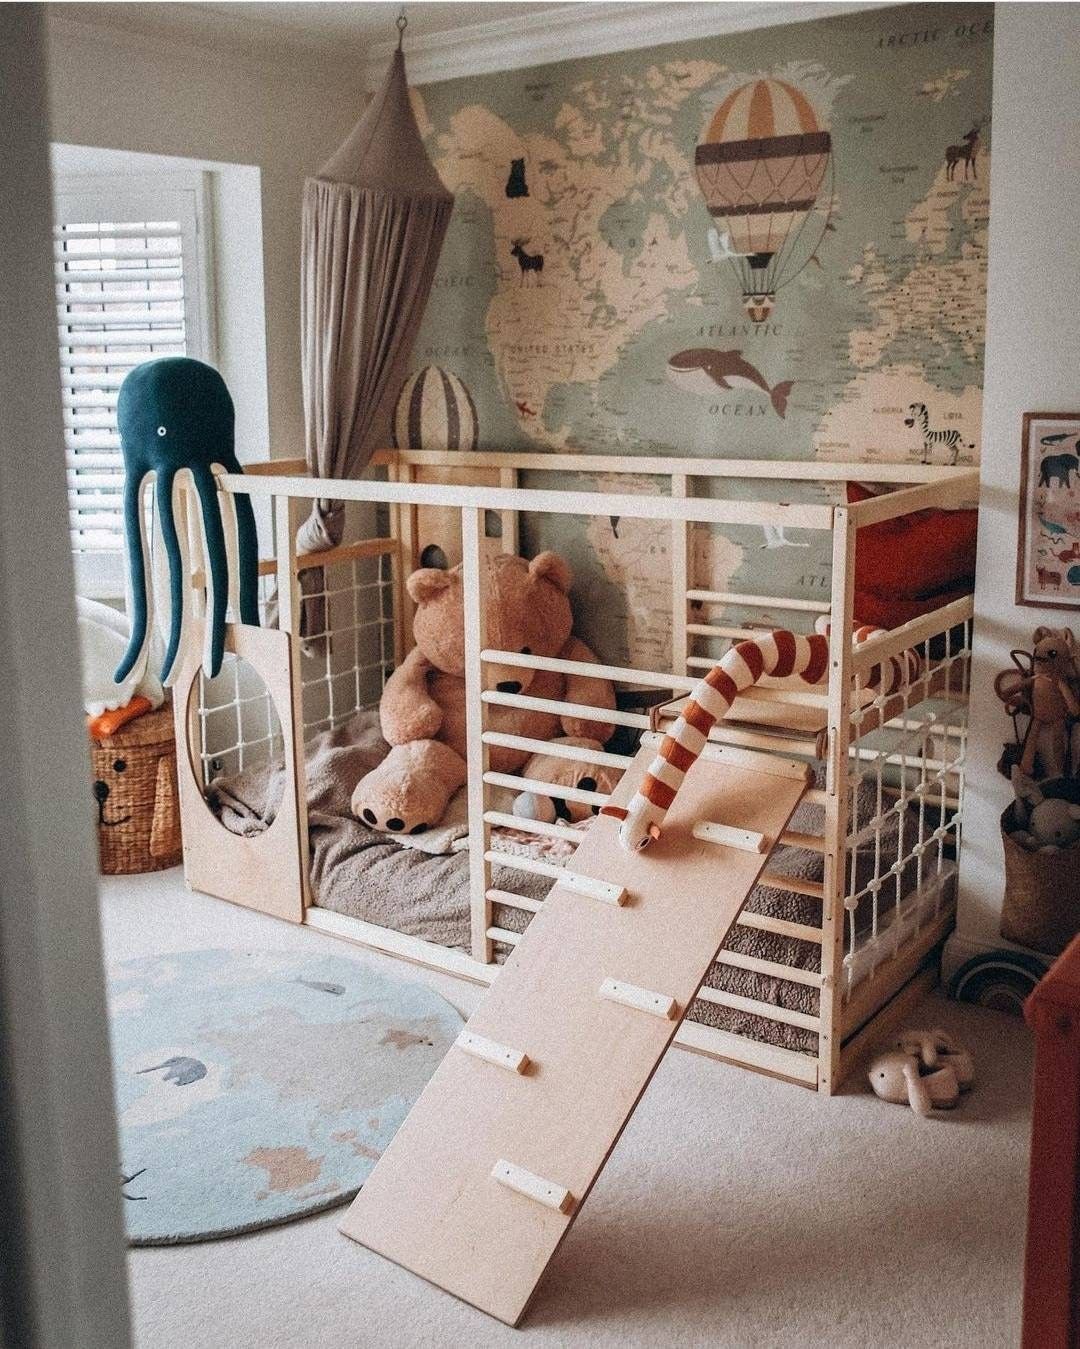 Toddler Bed Designs: Creating Dreamy
Spaces for Little Ones